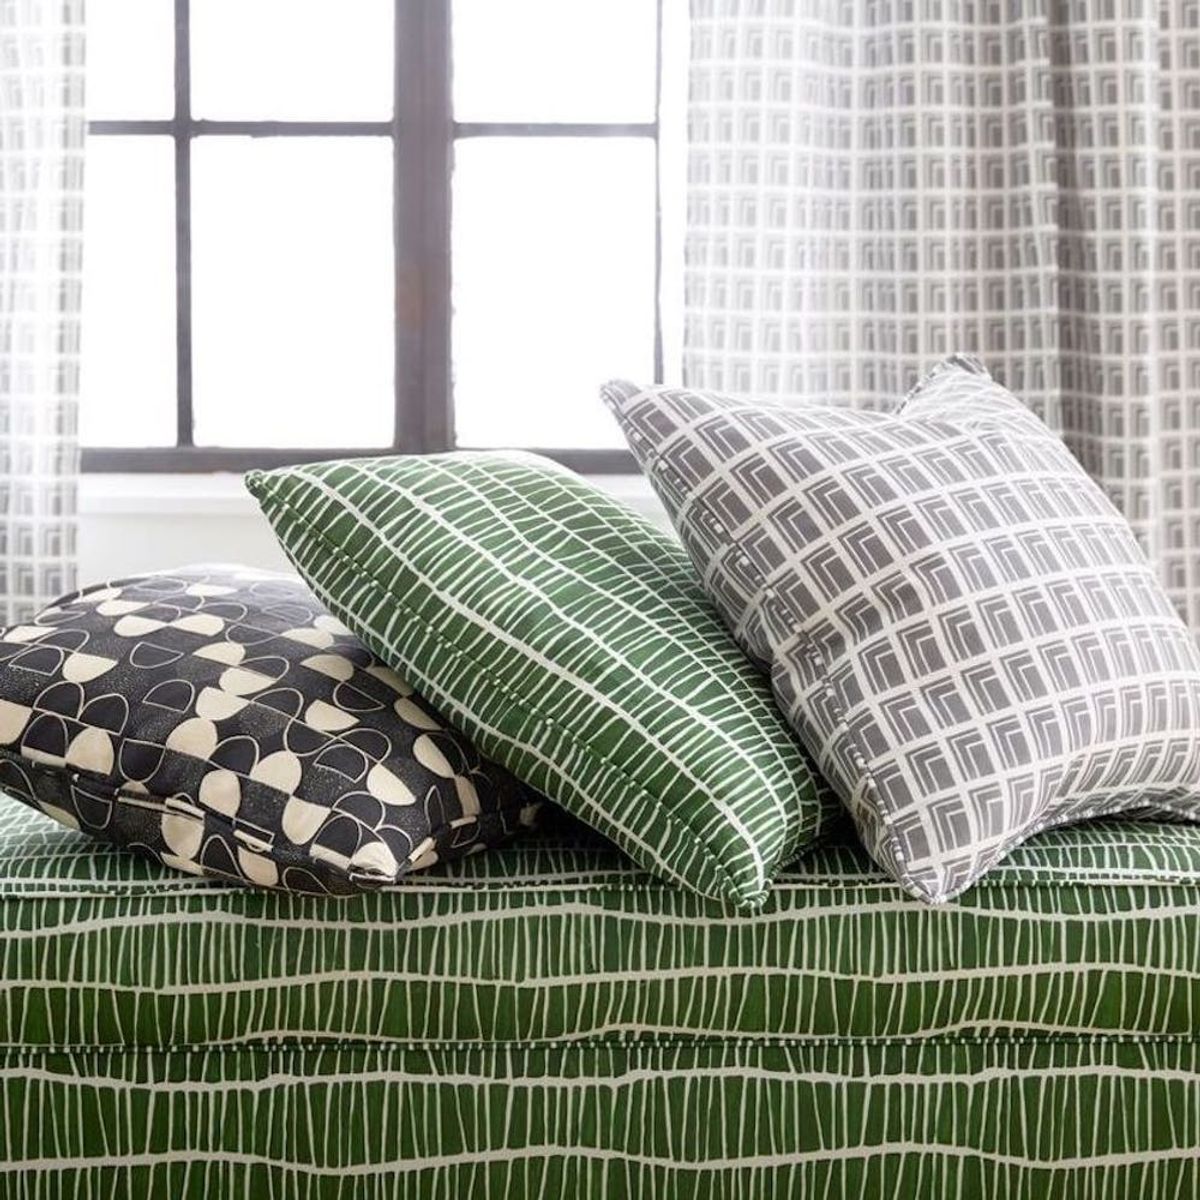 Shop the Most Print-astic Furniture Picks from Bed, Bath, and Beyond’s New Collection